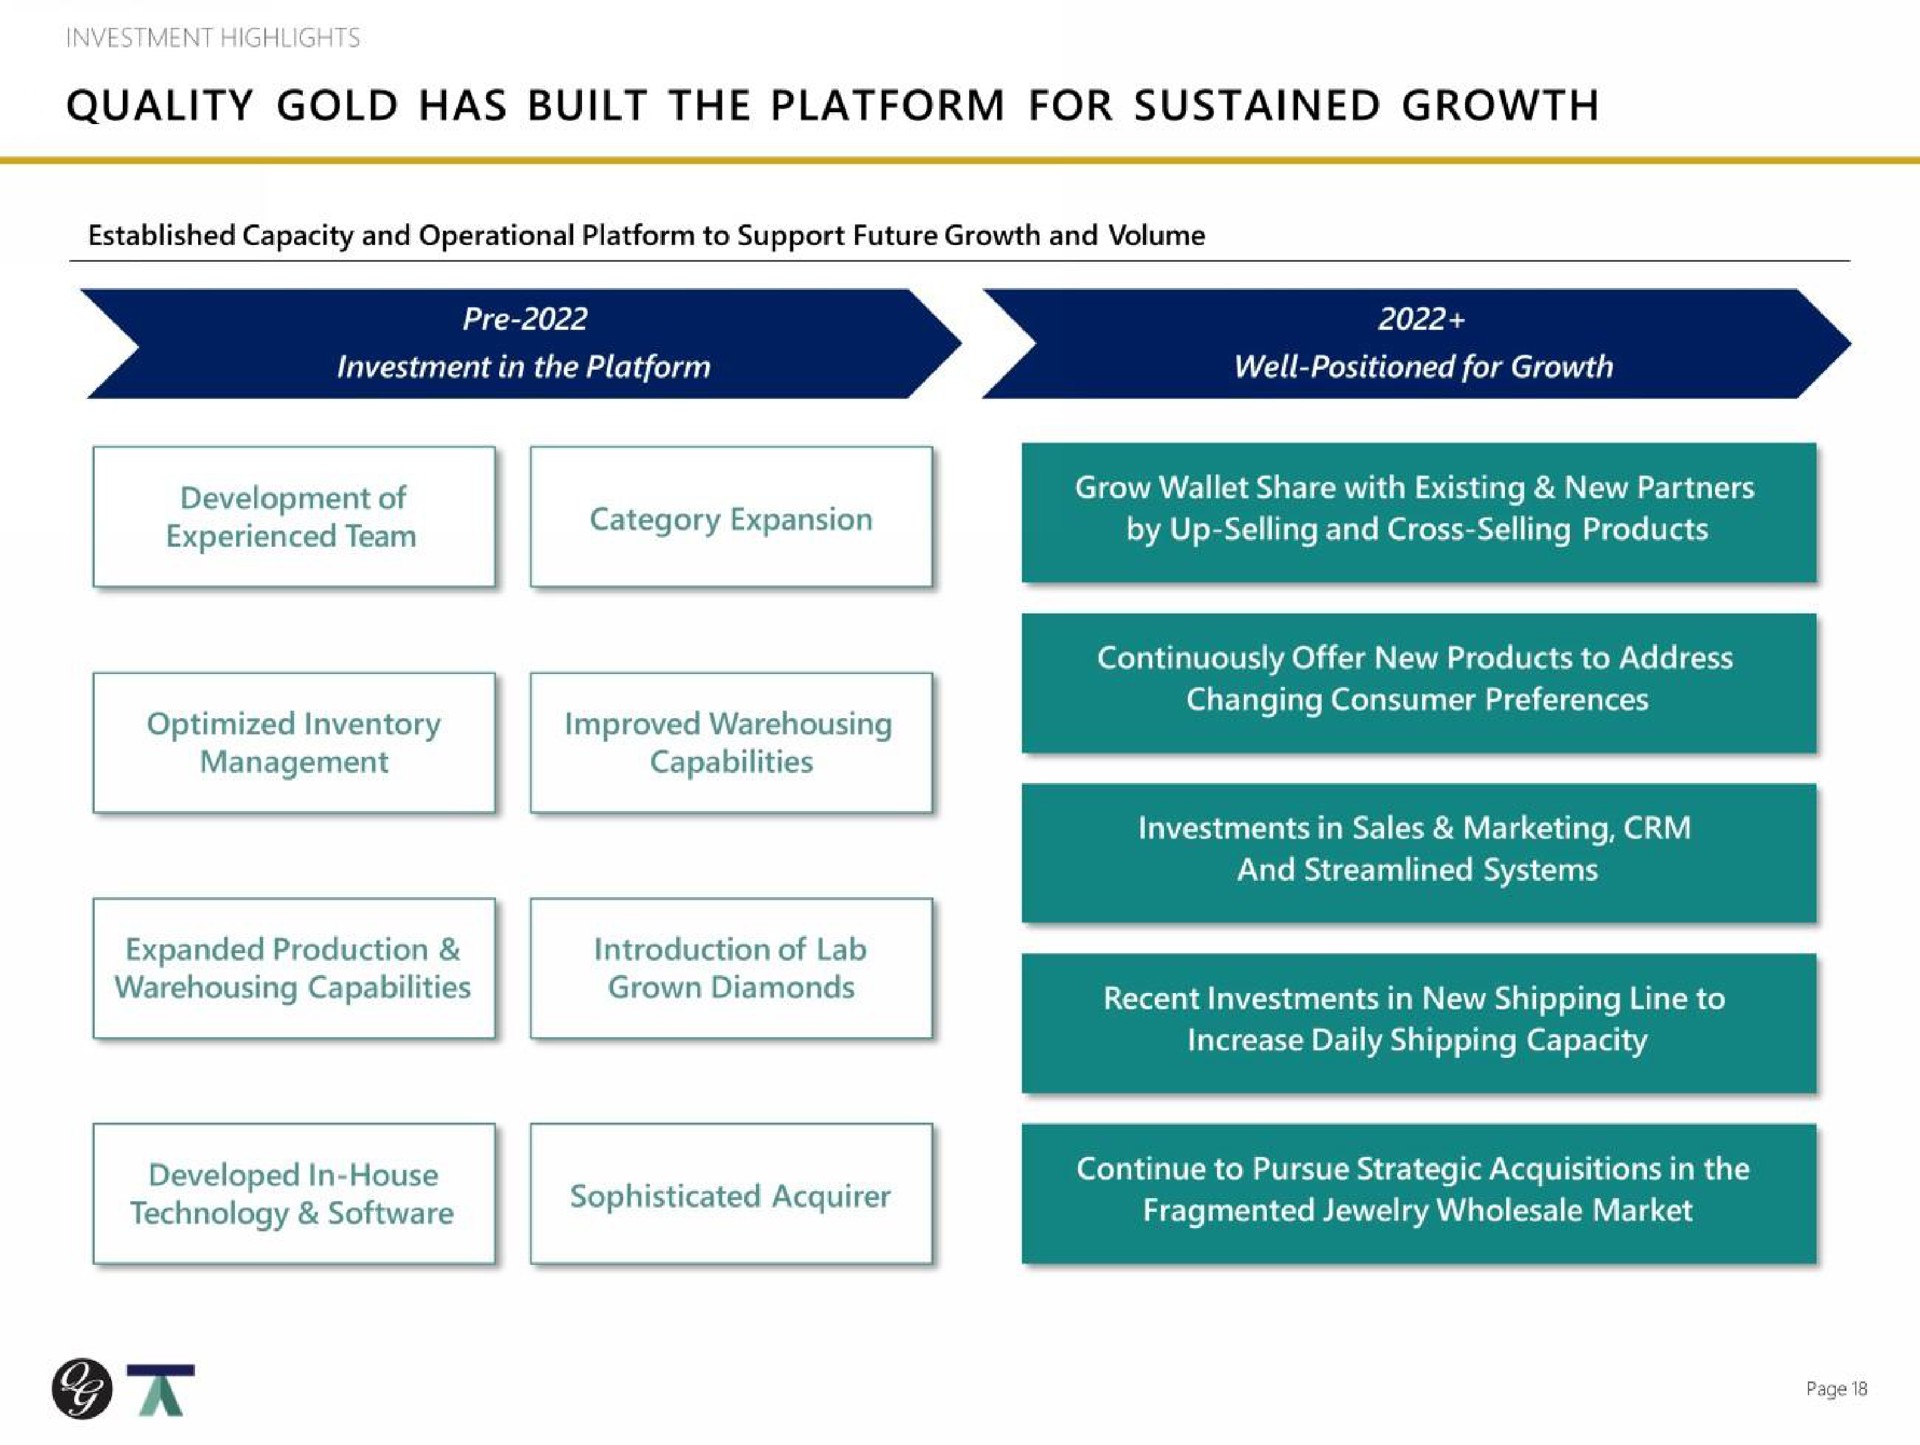 quality gold has built the platform for sustained growth continuously offer new products to address changing consumer preferences | Quality Gold